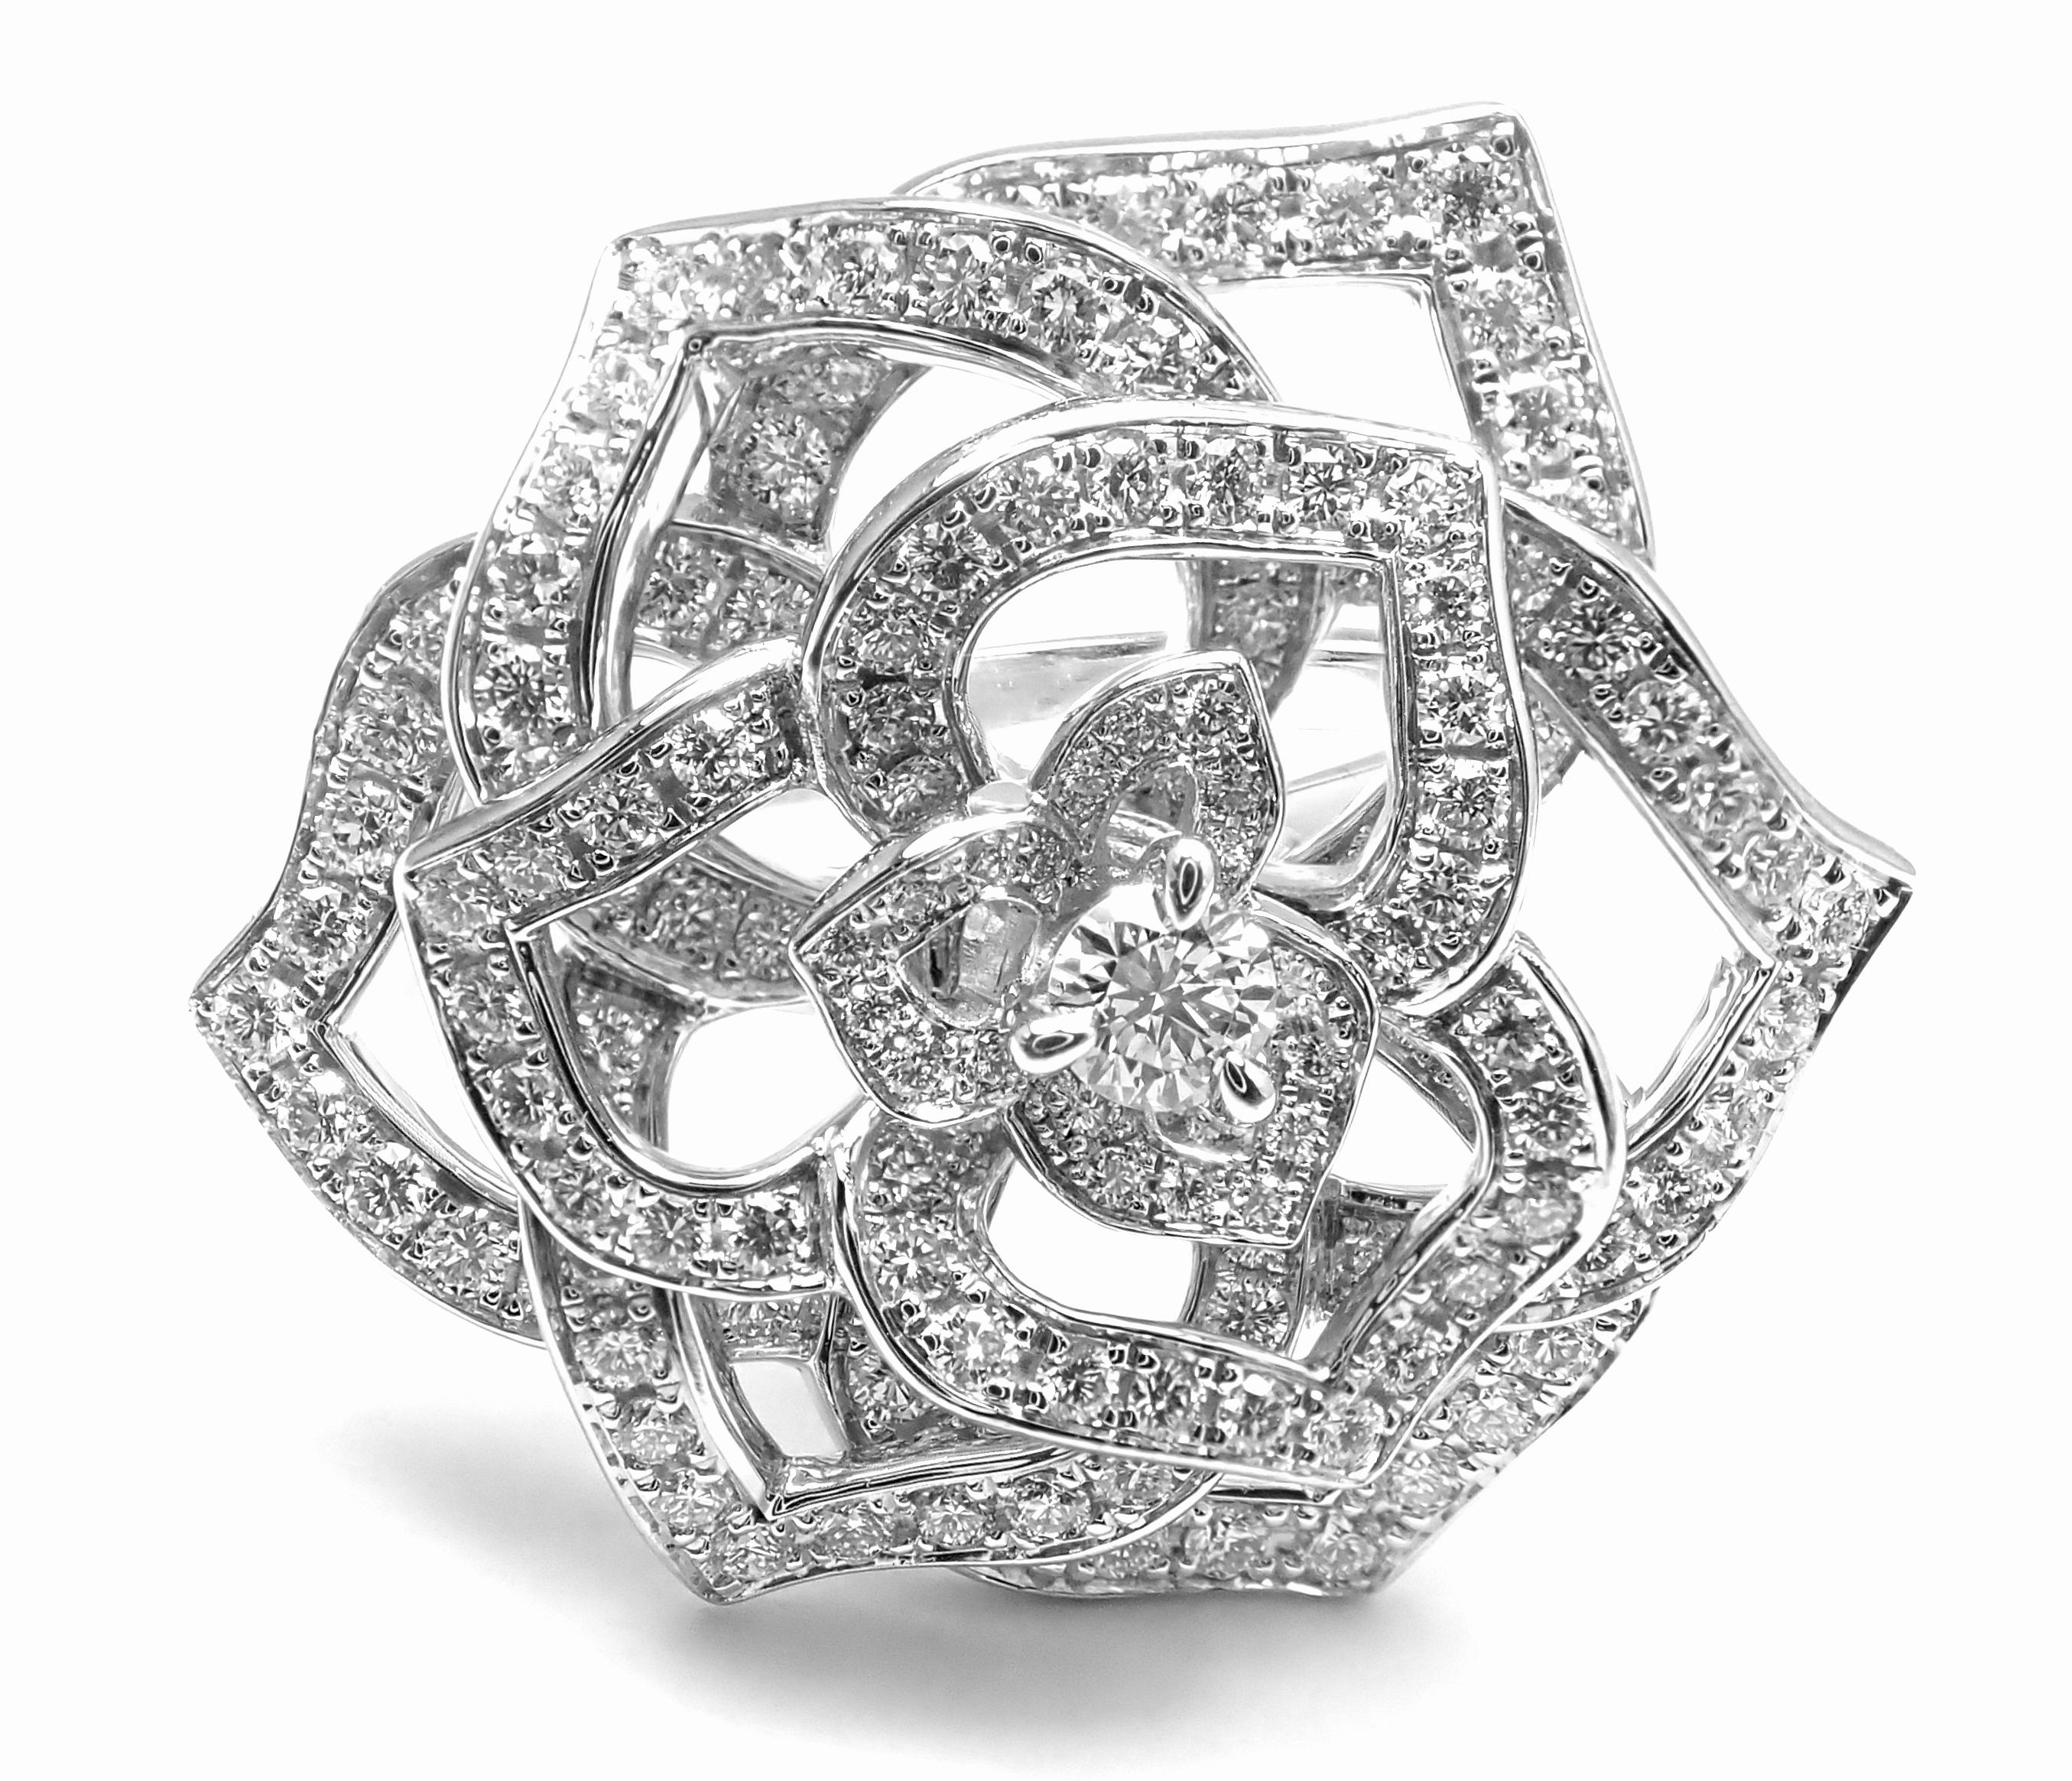 18k White Gold Diamond Rose Flower Ring by Piaget. 
With 153 round brilliant cut diamonds VS1 clarity, G color total weight approximately 1.12ct
Details: 
Ring Size: European 54, US 6.75
Weight: 9.8 grams
Width: 24mm
Stamped Hallmarks: Piaget 750